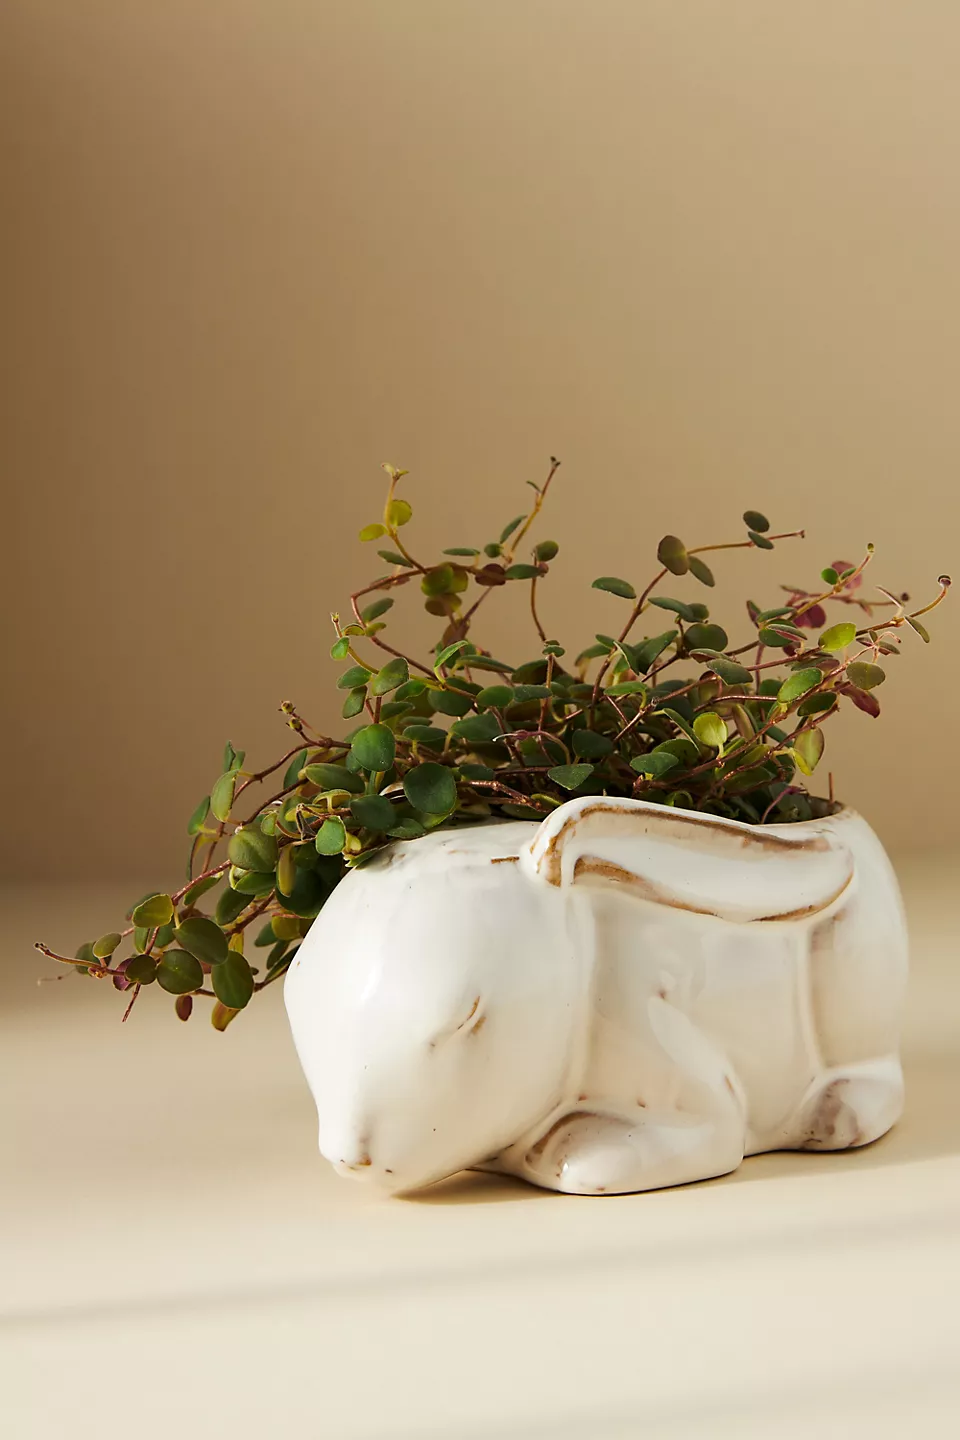 Ceramic planter with a unique sleeping bunny design, filled with a green trailing plant. Ideal for home decor